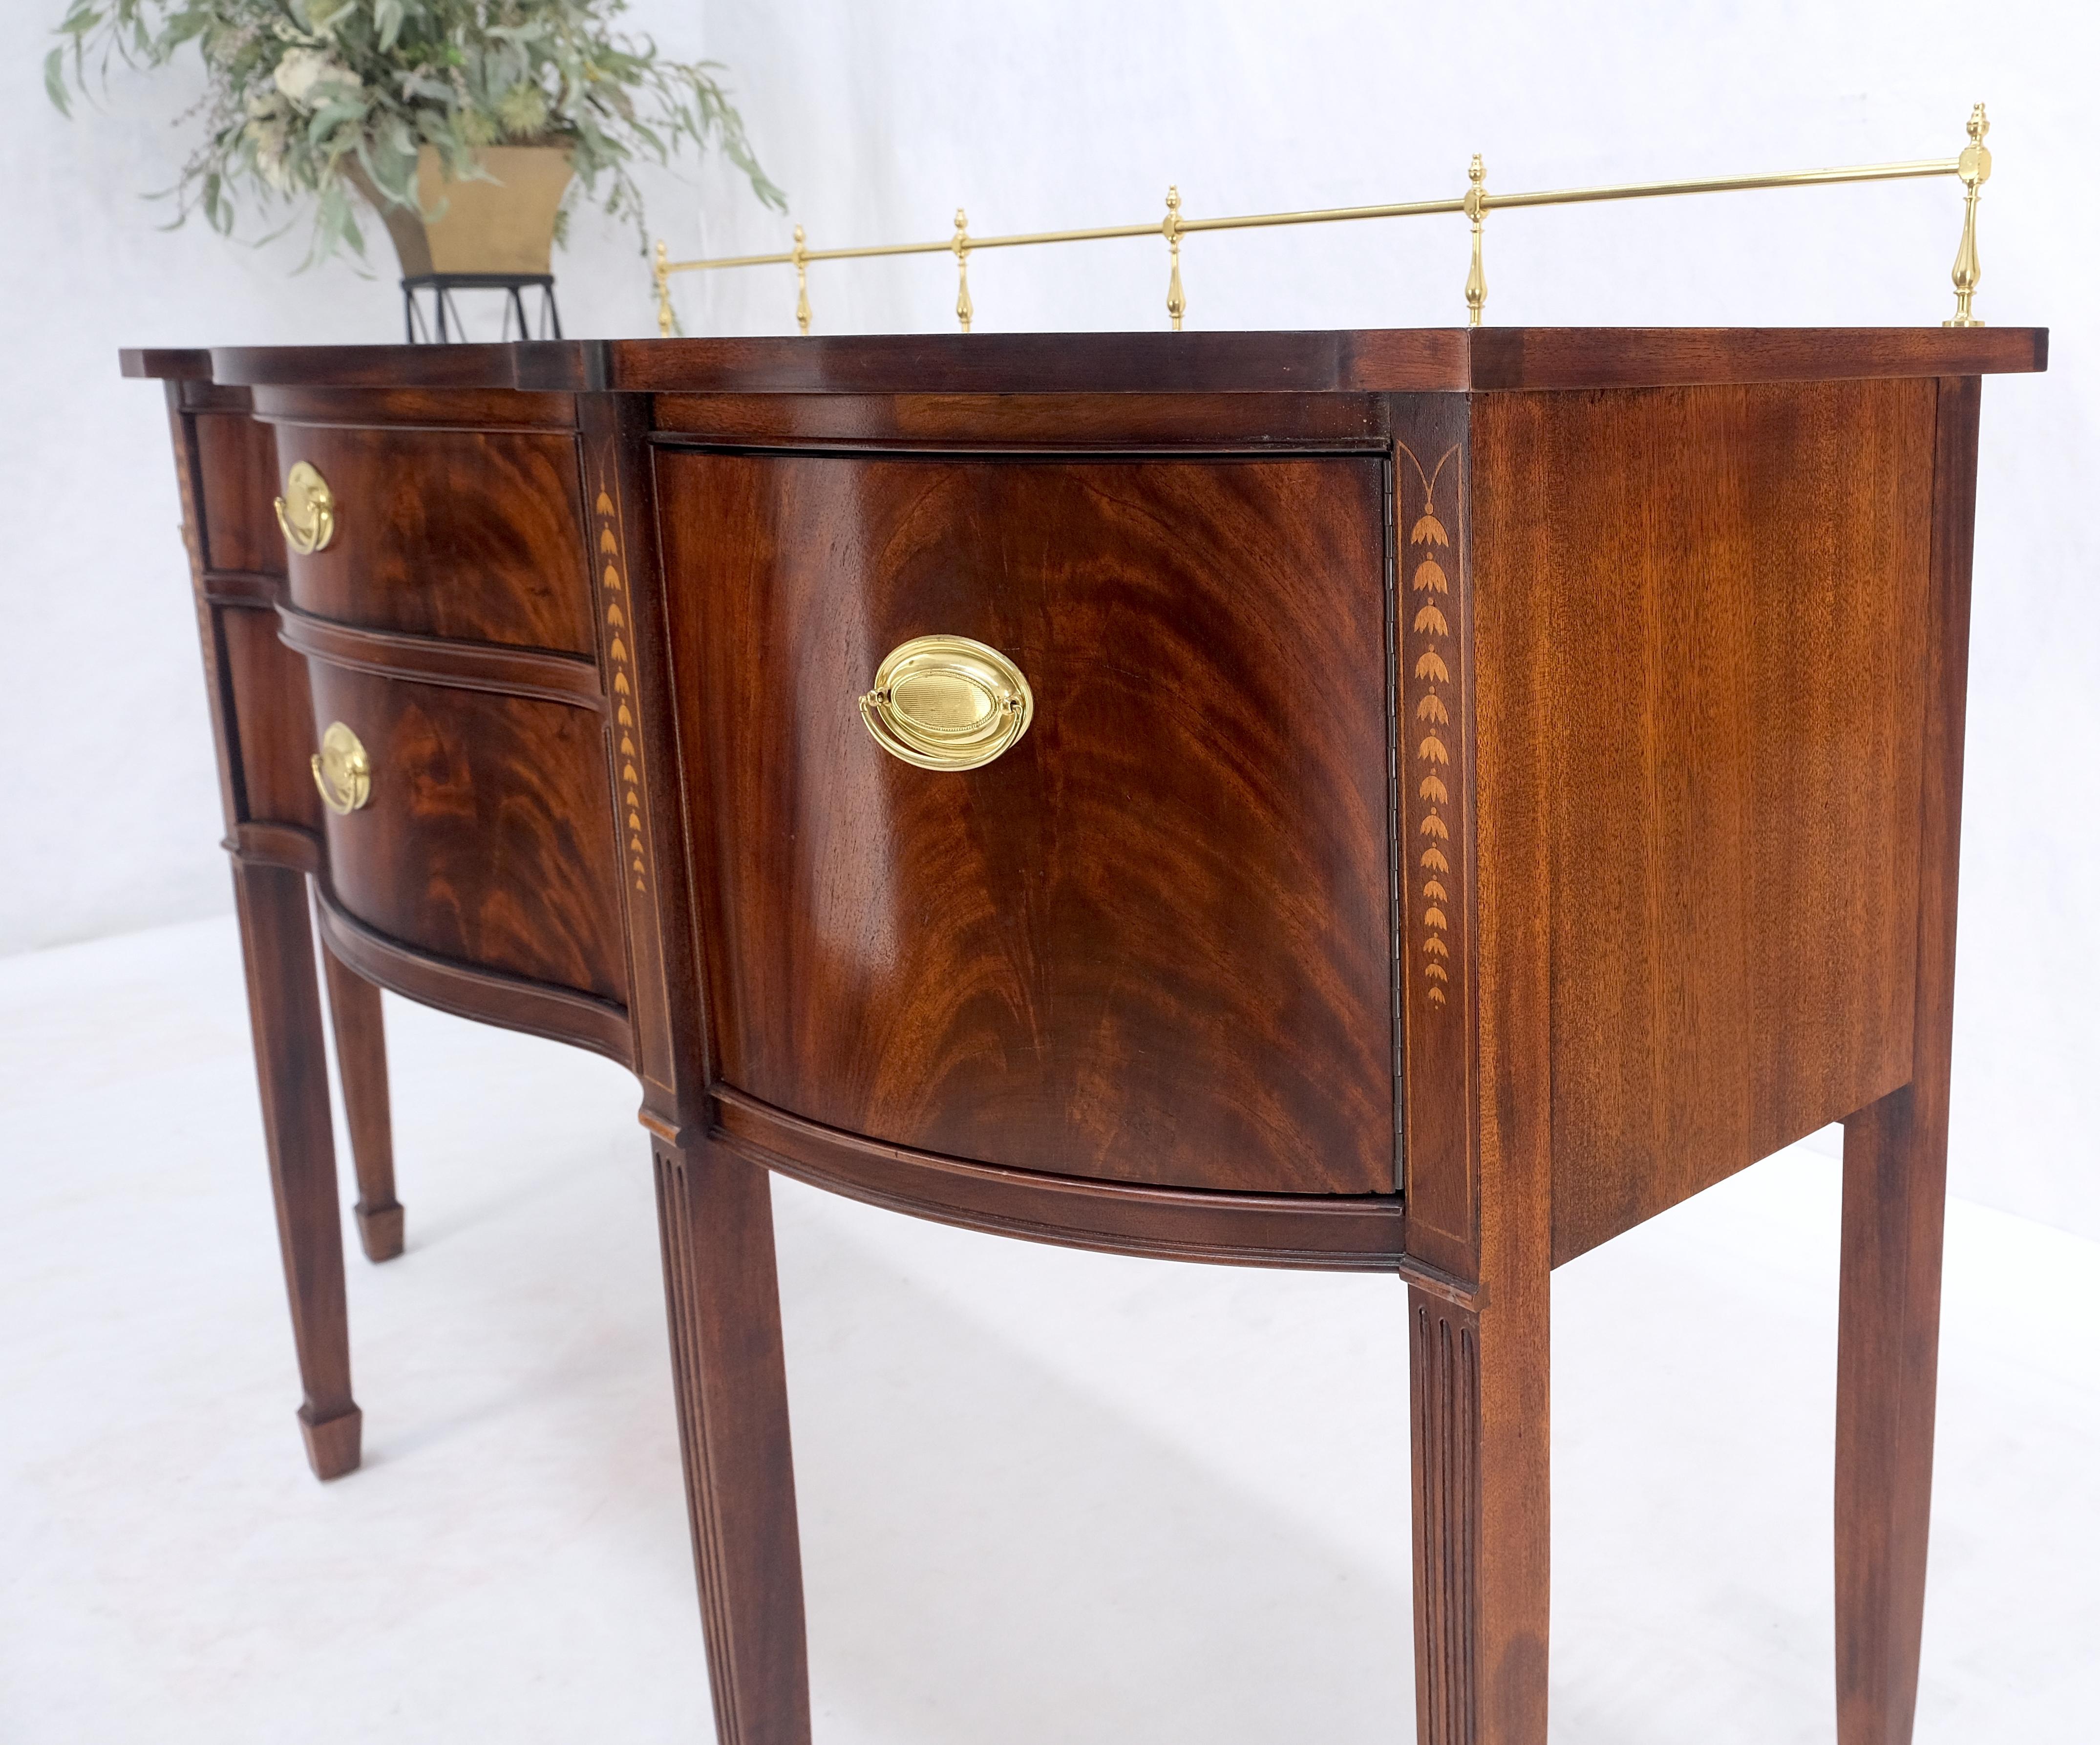 MINT Brass Gallery Crotch Mahogany Serpentine Front Sideboard Federal by Thomasville.